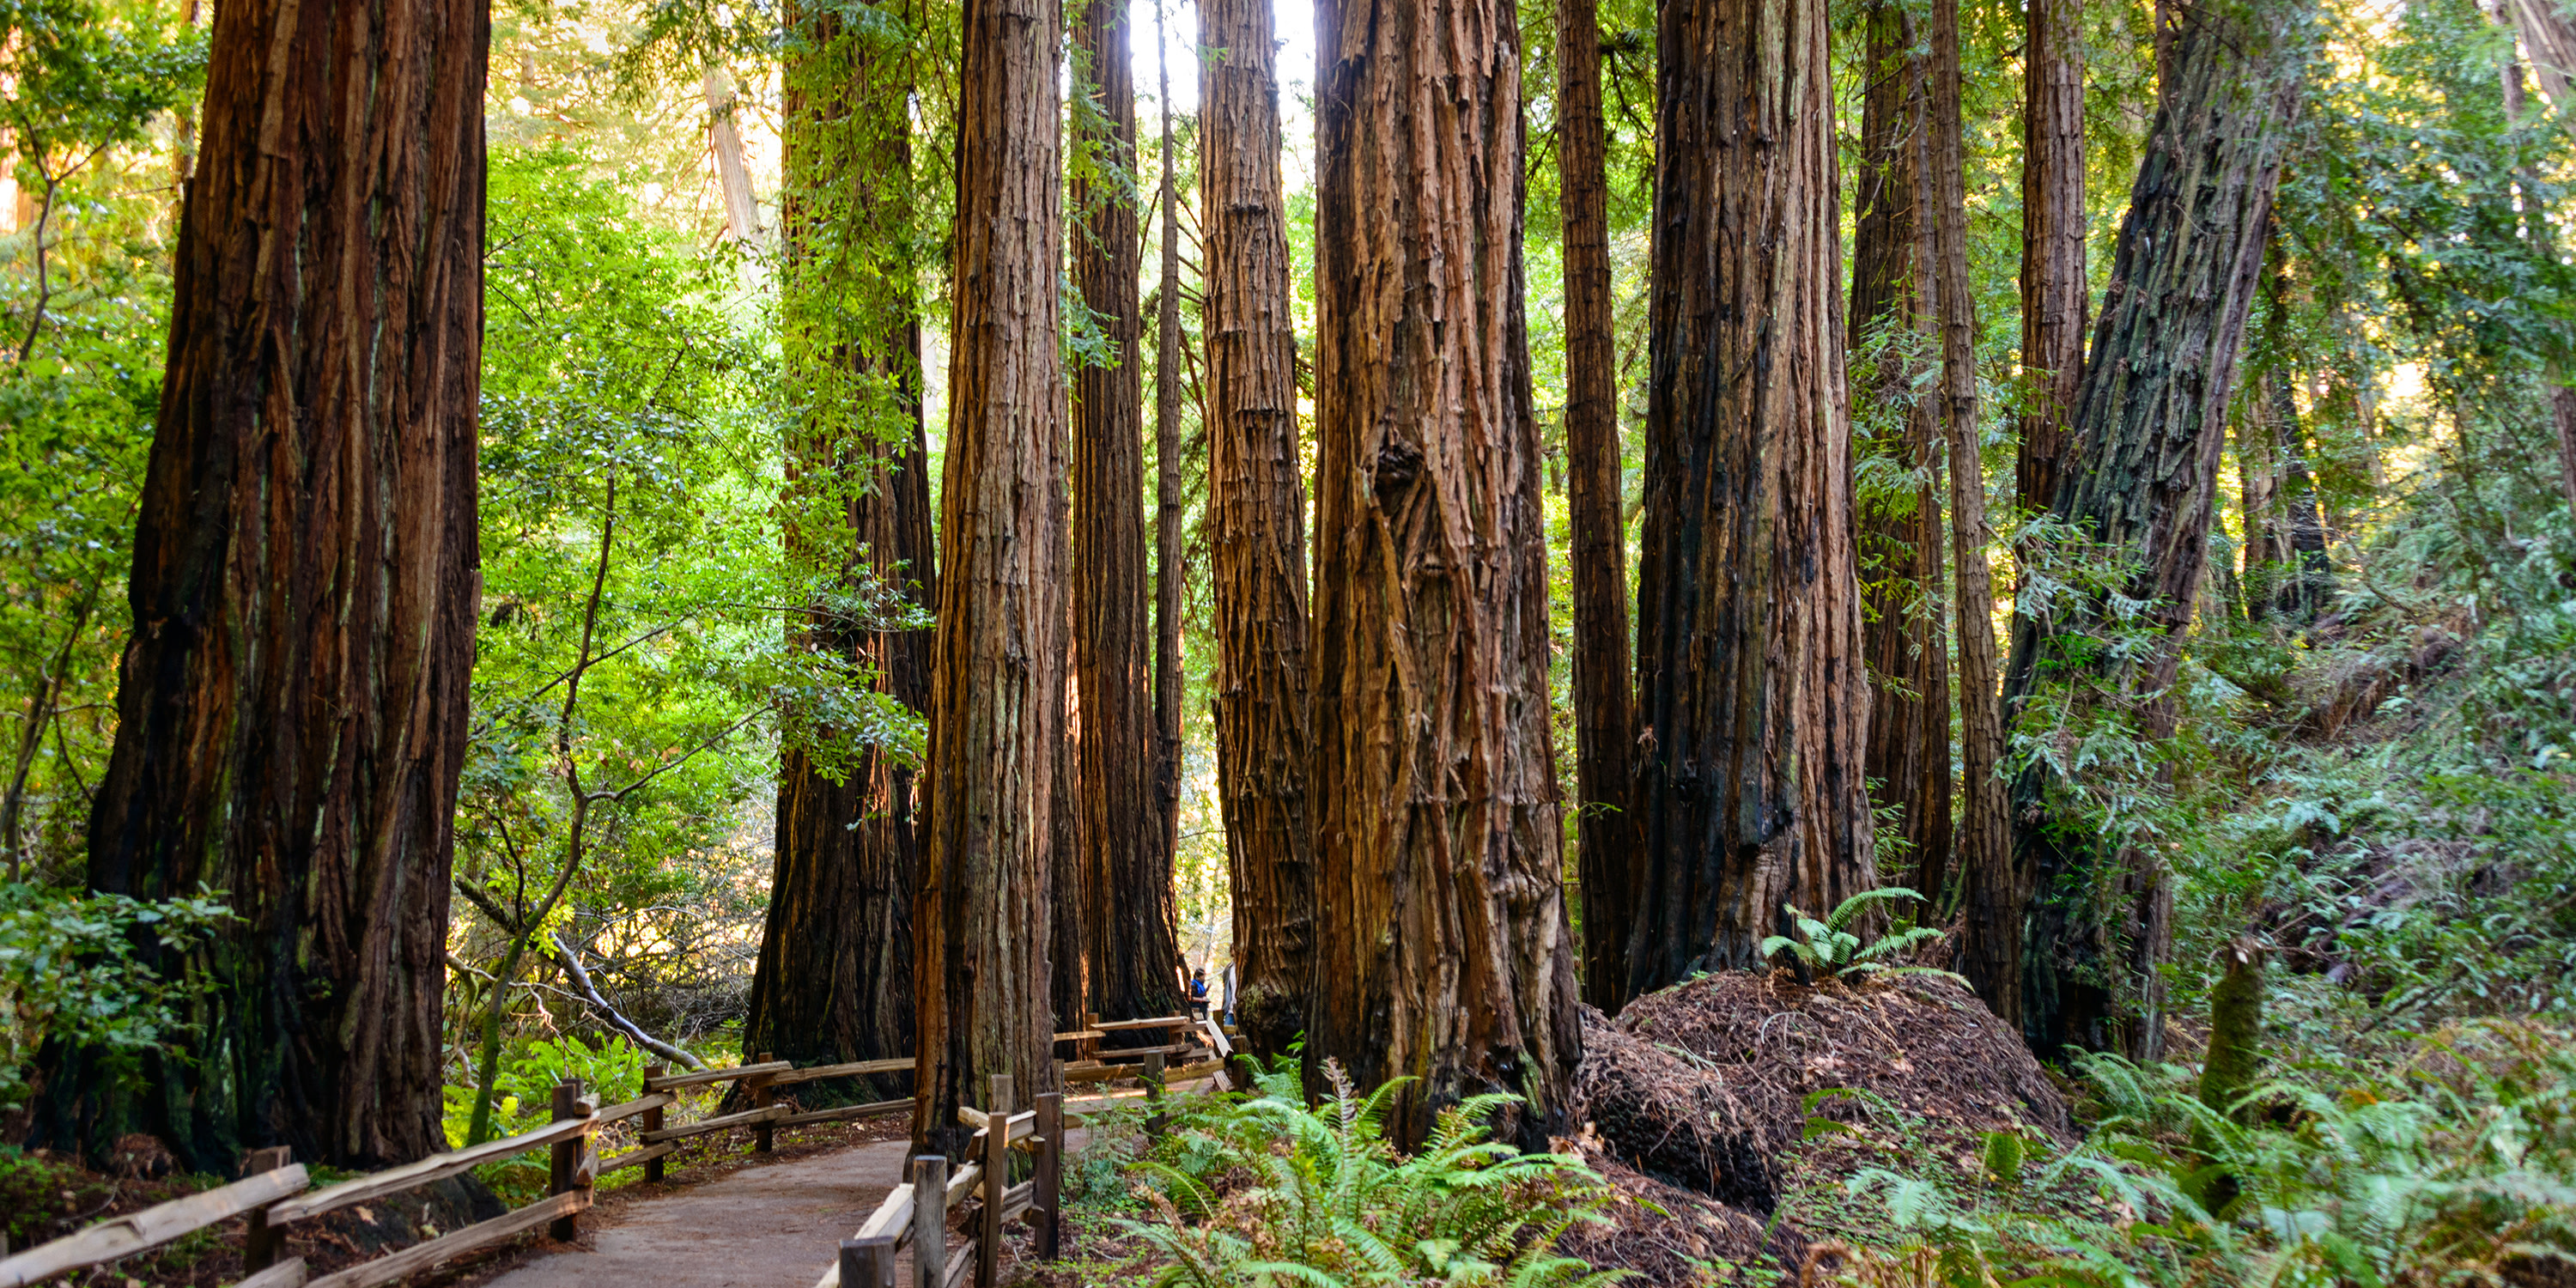 when to visit muir woods